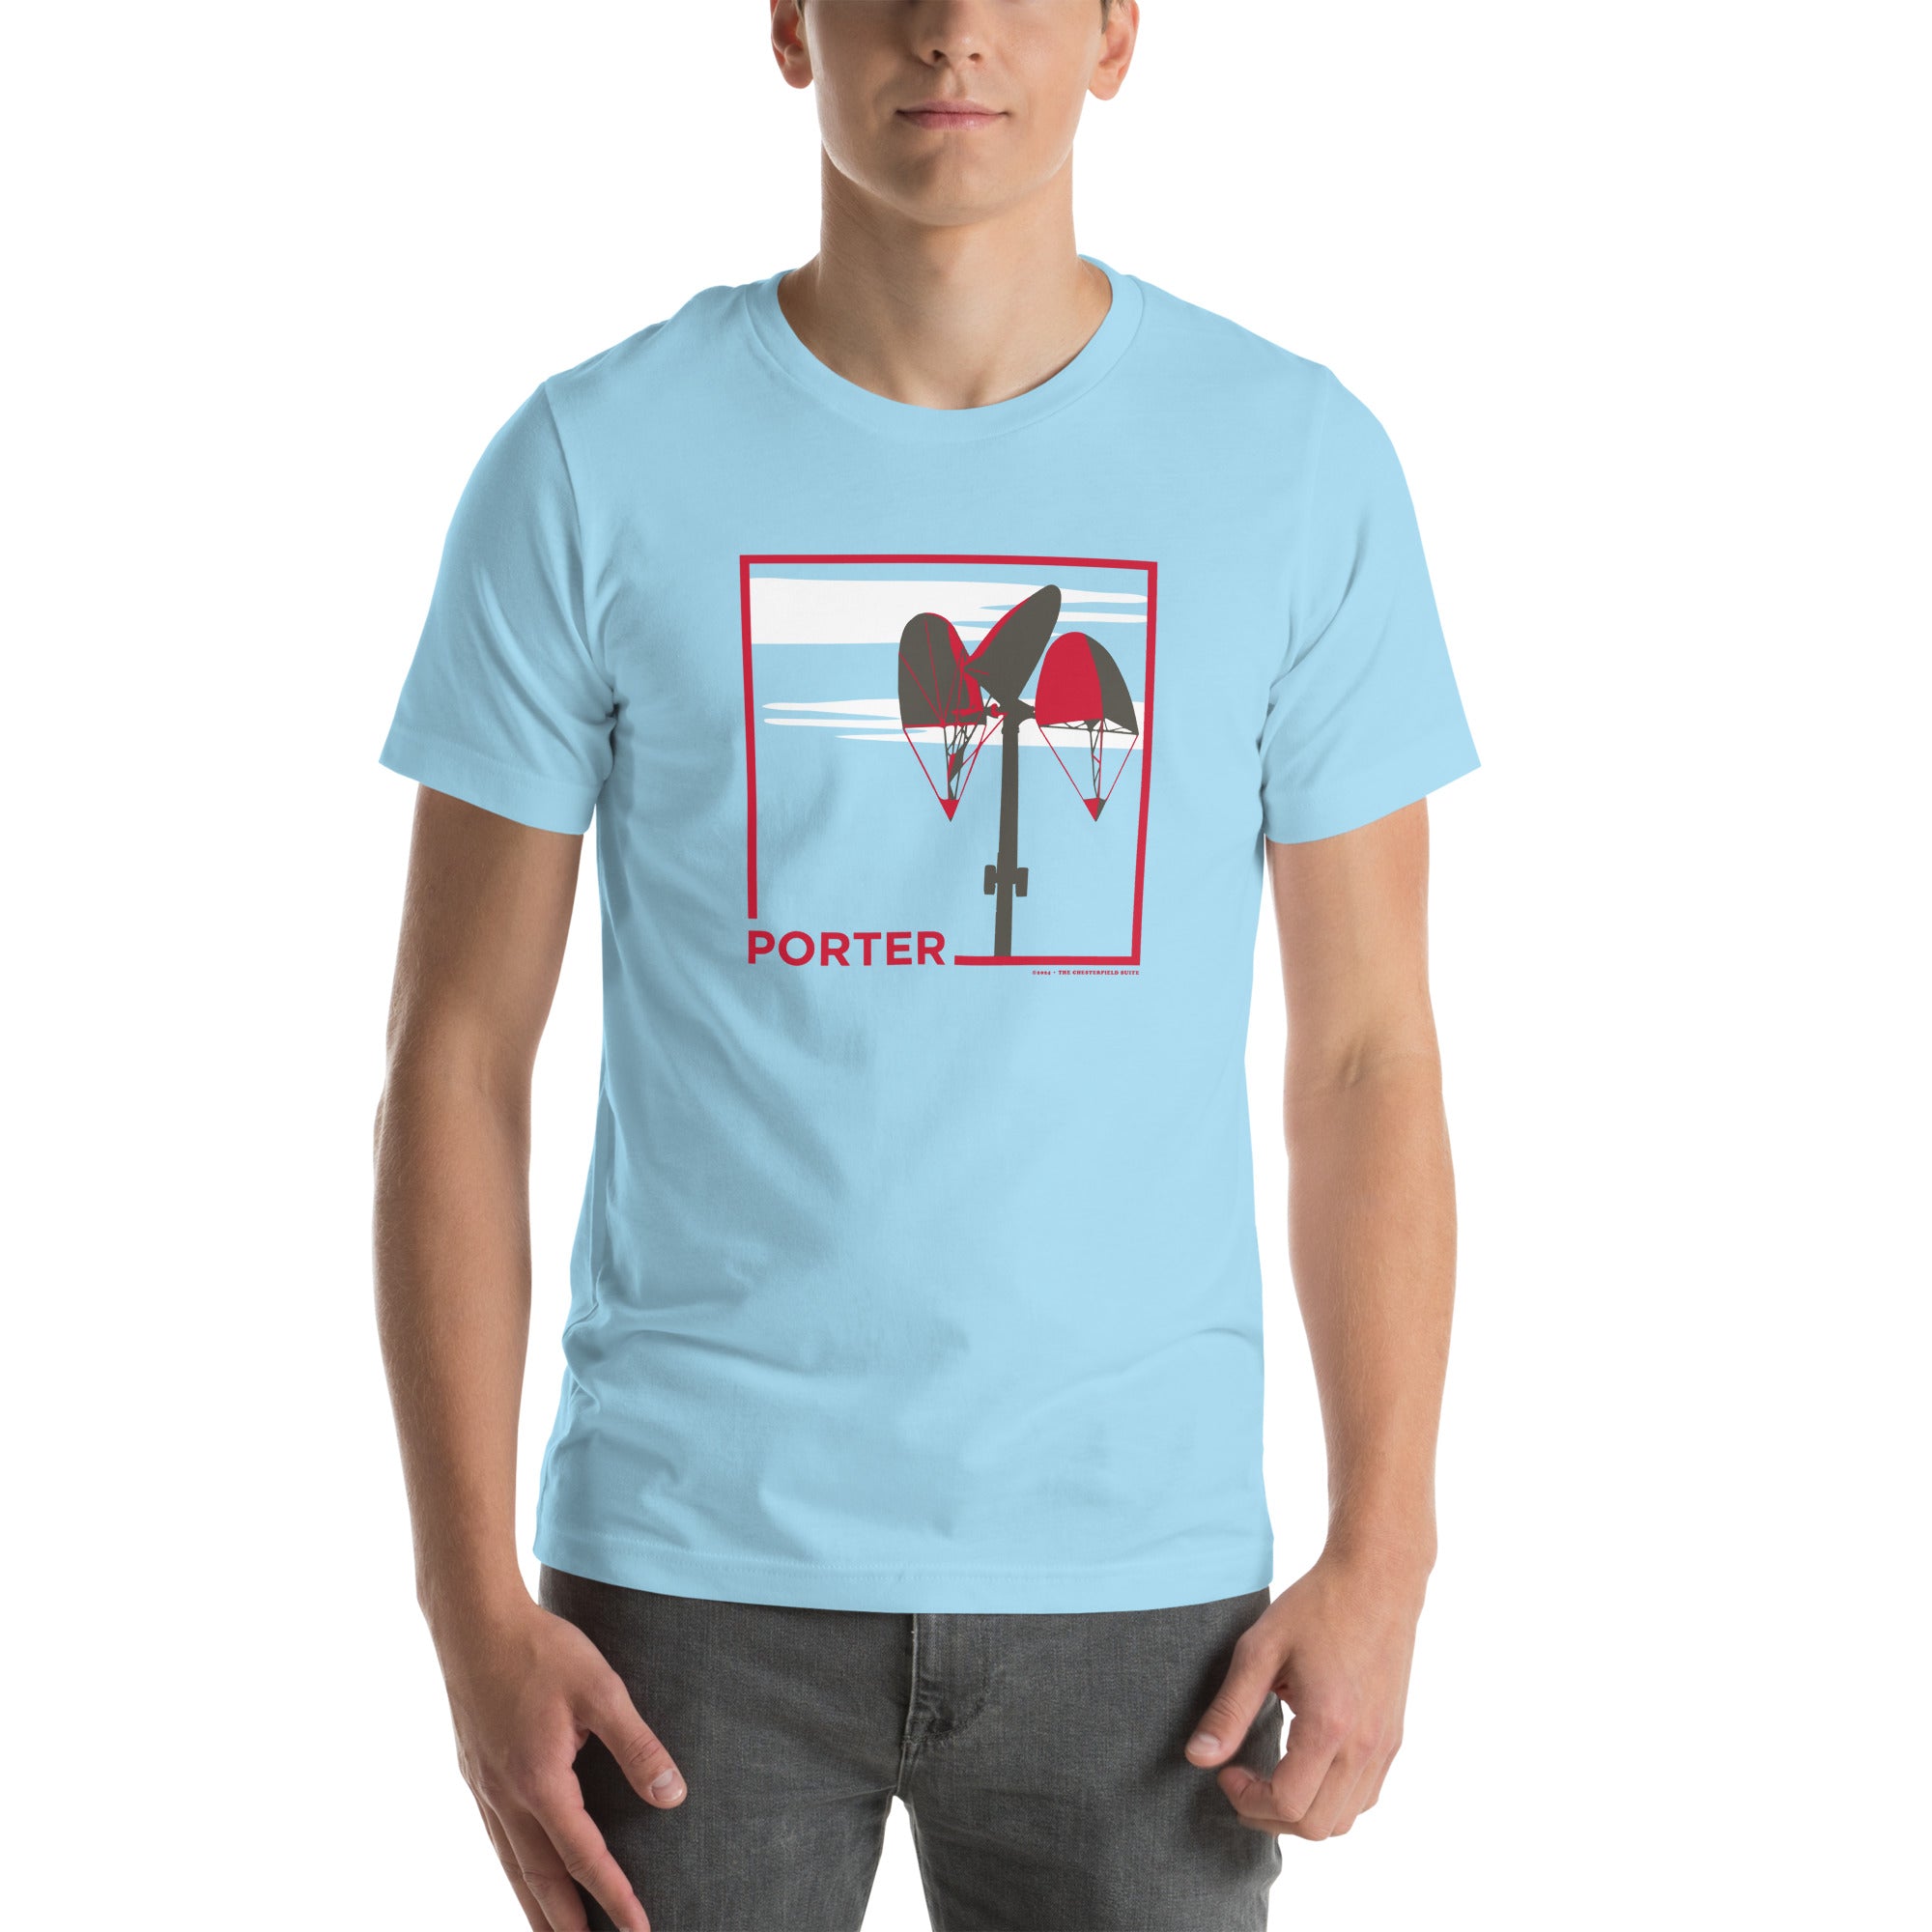 man wearing light blue unisex t-shirt with the word porter and a square in red, featuring it's mobile and a white cloud